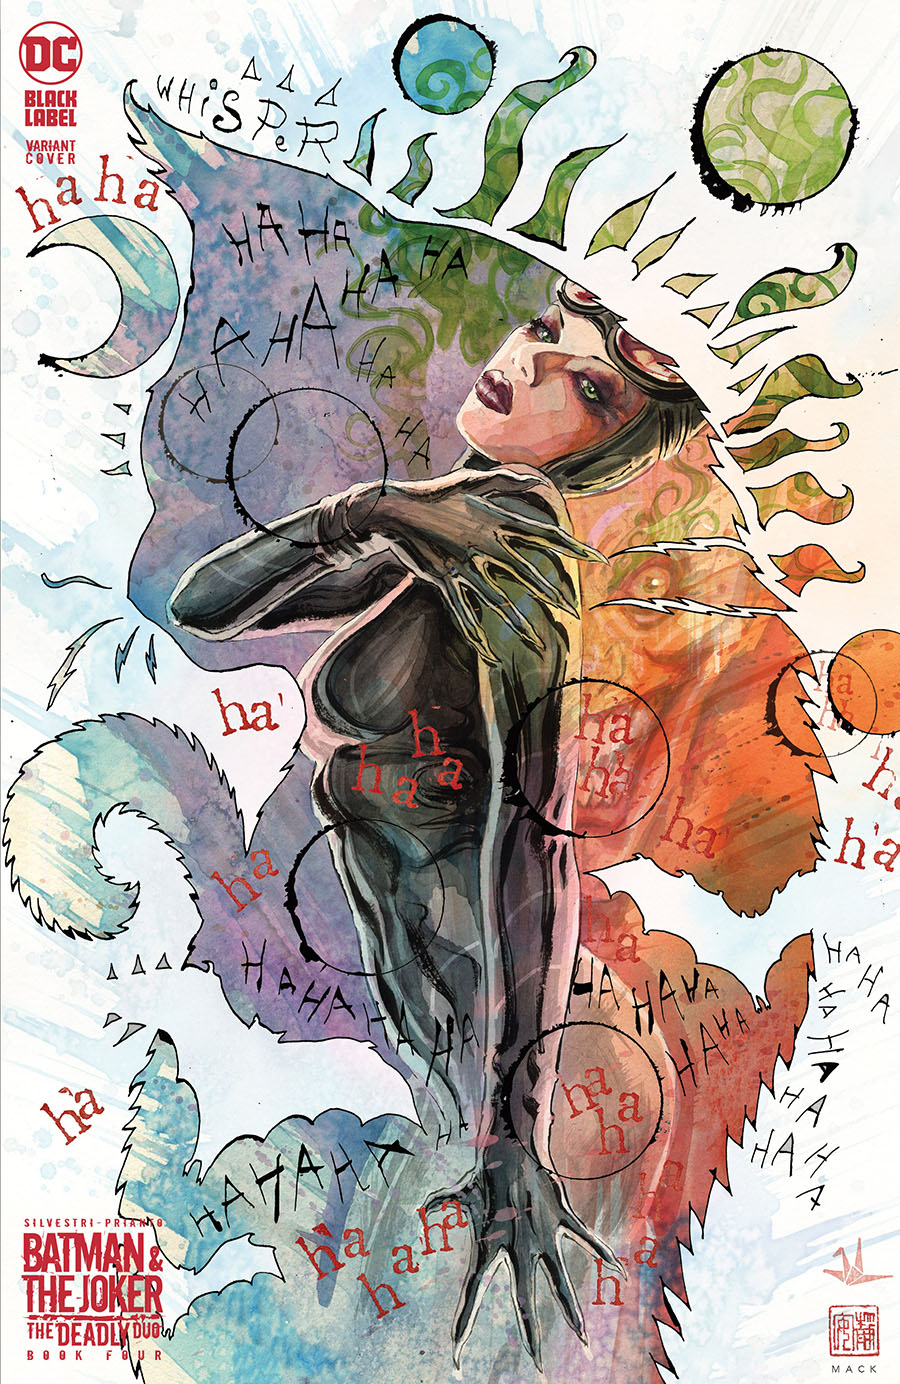 Batman & The Joker The Deadly Duo #4 Cover C Variant David Mack Catwoman Cover (Limit 1 Per Customer)